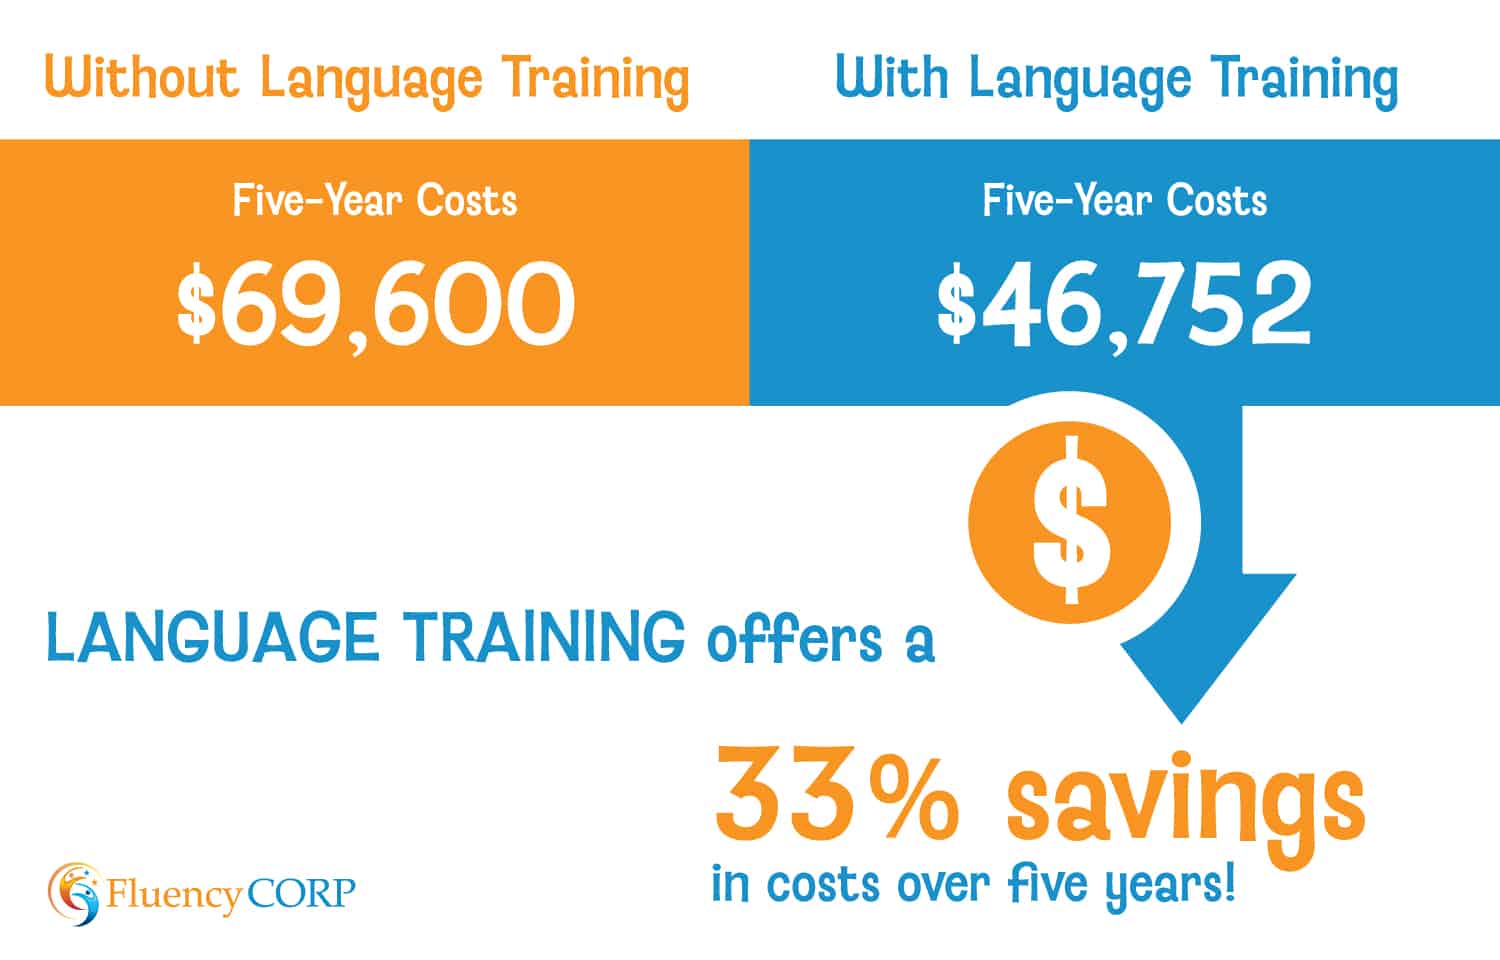 Infographic showing the five year costs with and without corporate language training, showing a savings of 33% with language training